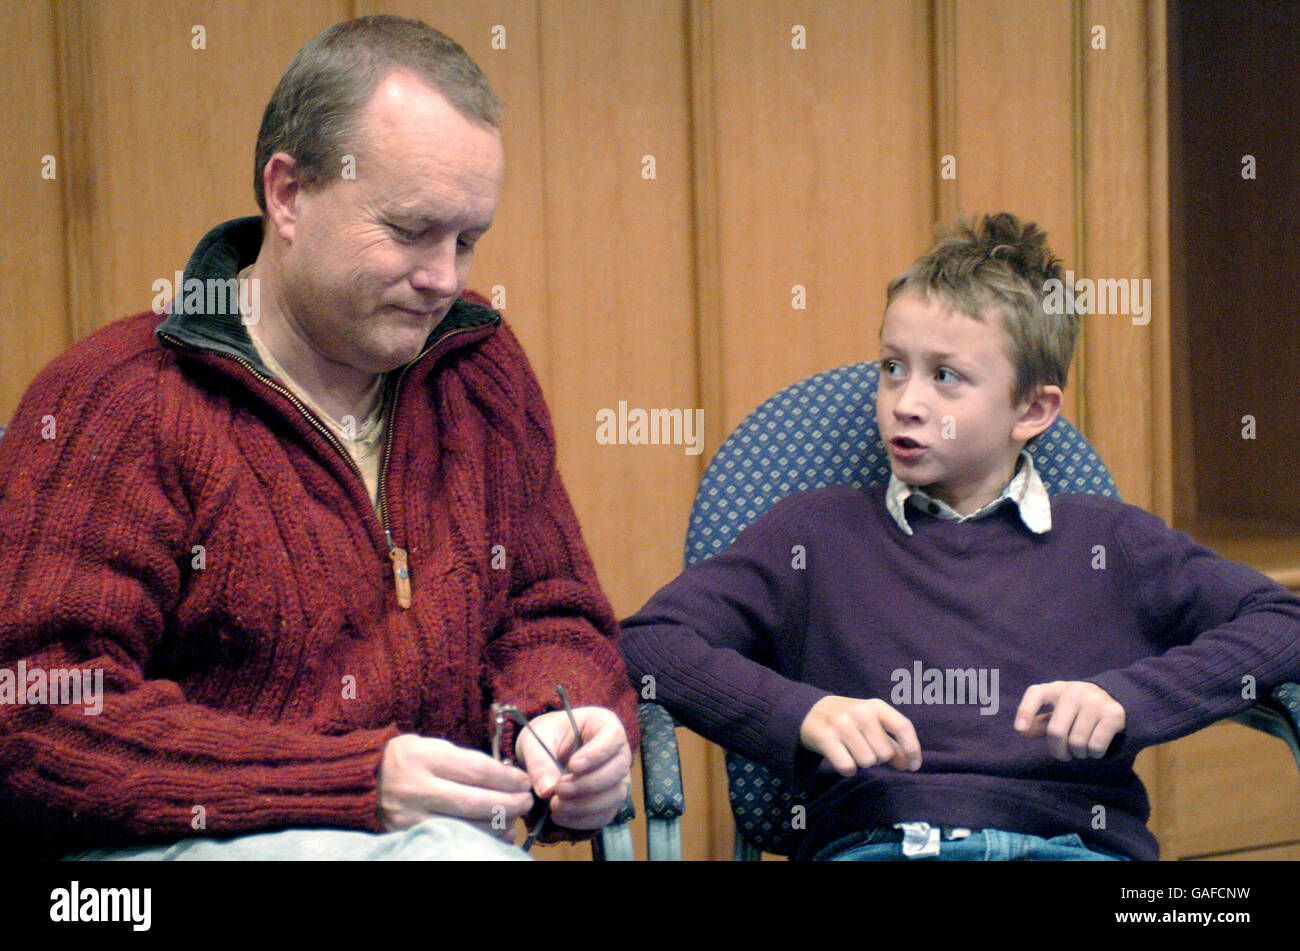 Steven Tomlinson, aged 10, with his father Mike, on the eve of the Woman's Own Children of Courage Awards, which recognises children who have shown outstanding bravery and courage in adult circumstances over the past year. Stock Photo